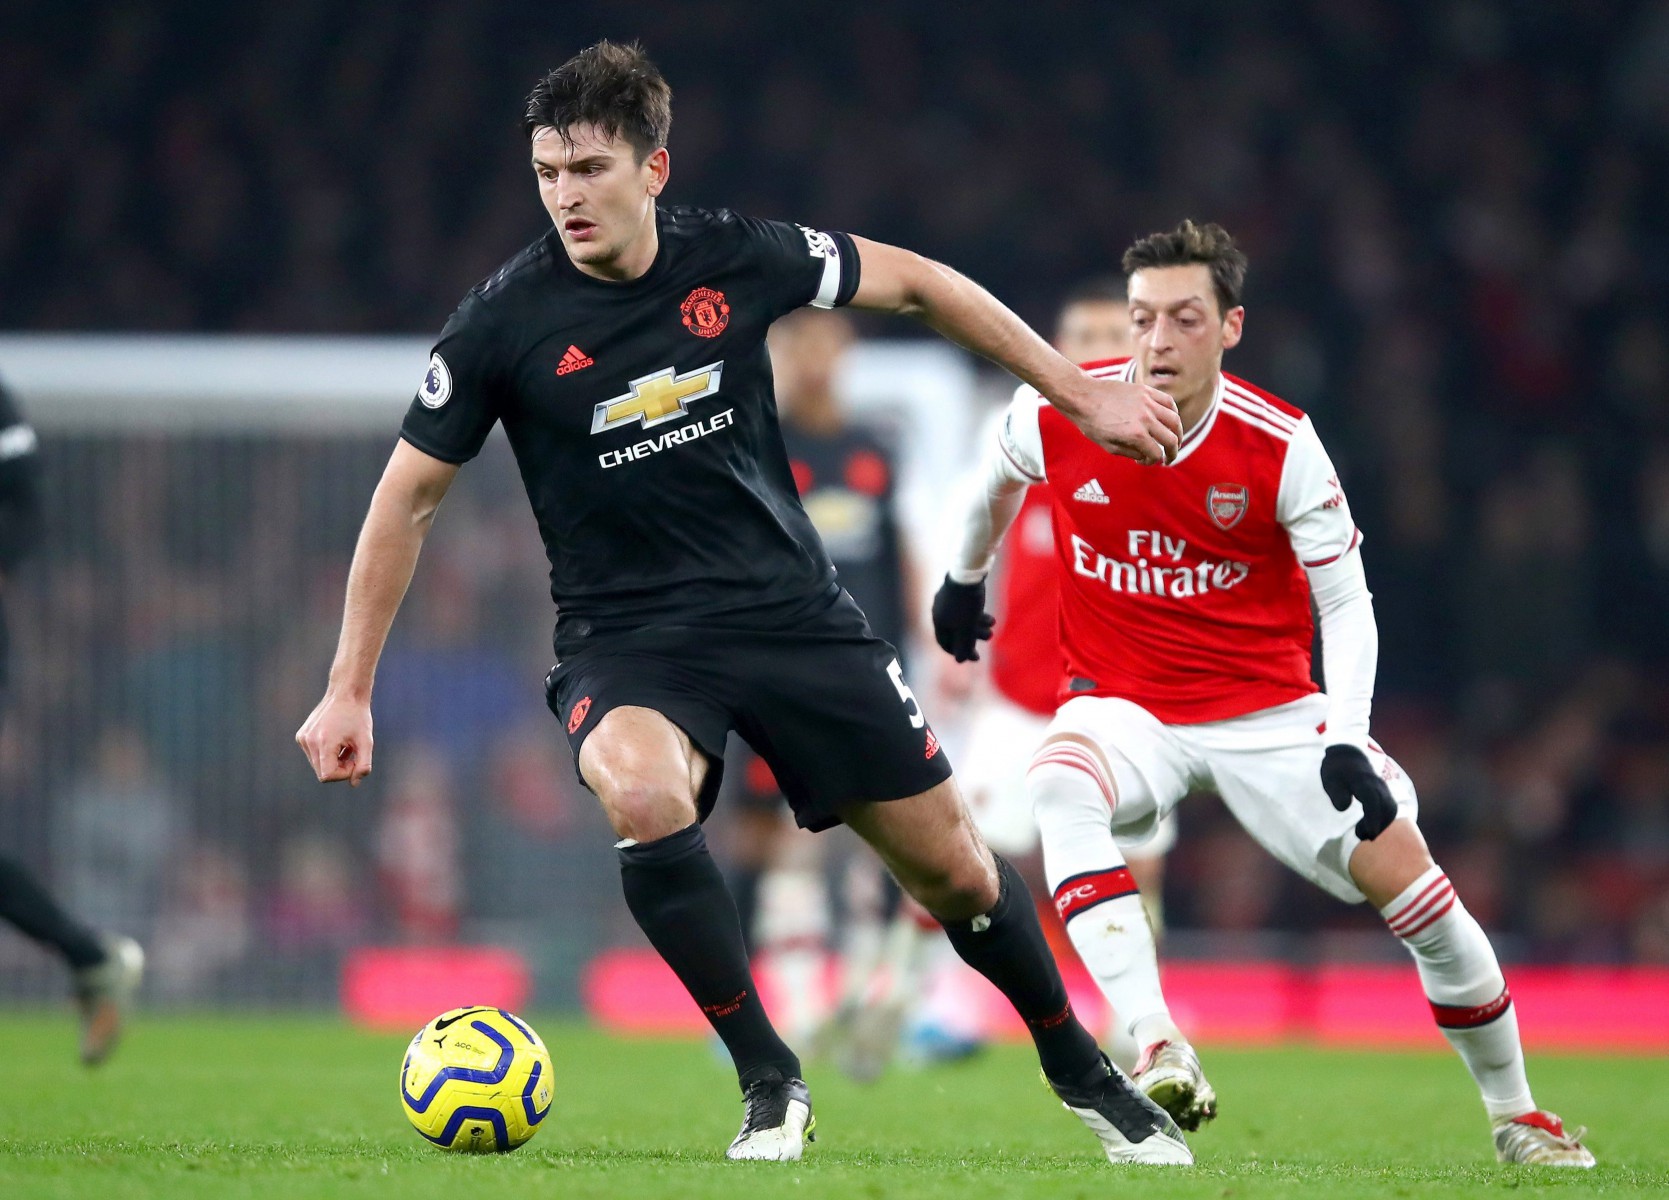 Harry Maguire is not good enough for Man Utd says Paul Parker